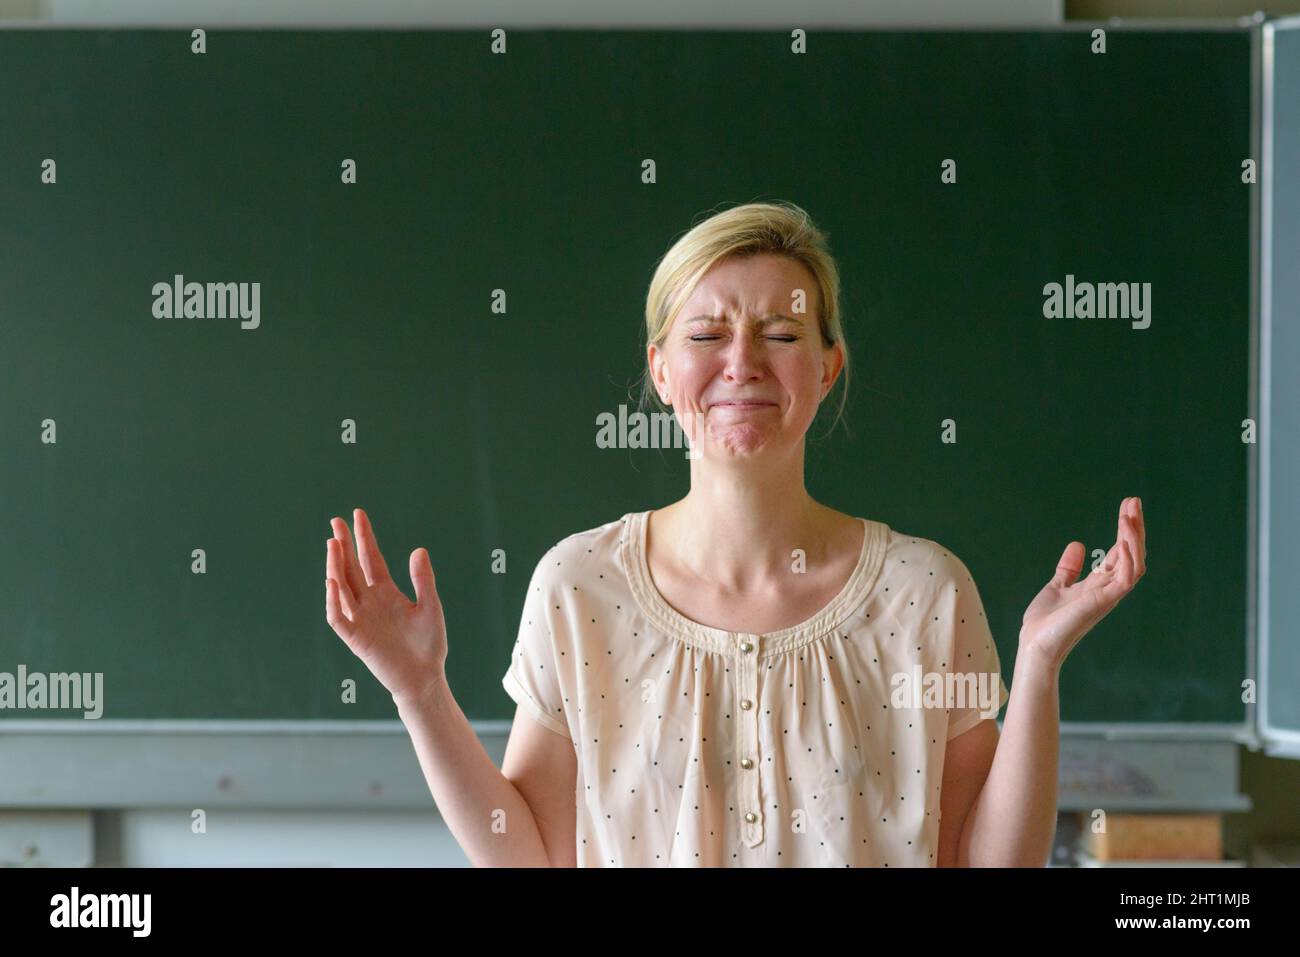 Angry frustrated school teacher with her hands up standing in front of a chalkboard in a classroom Stock Photo